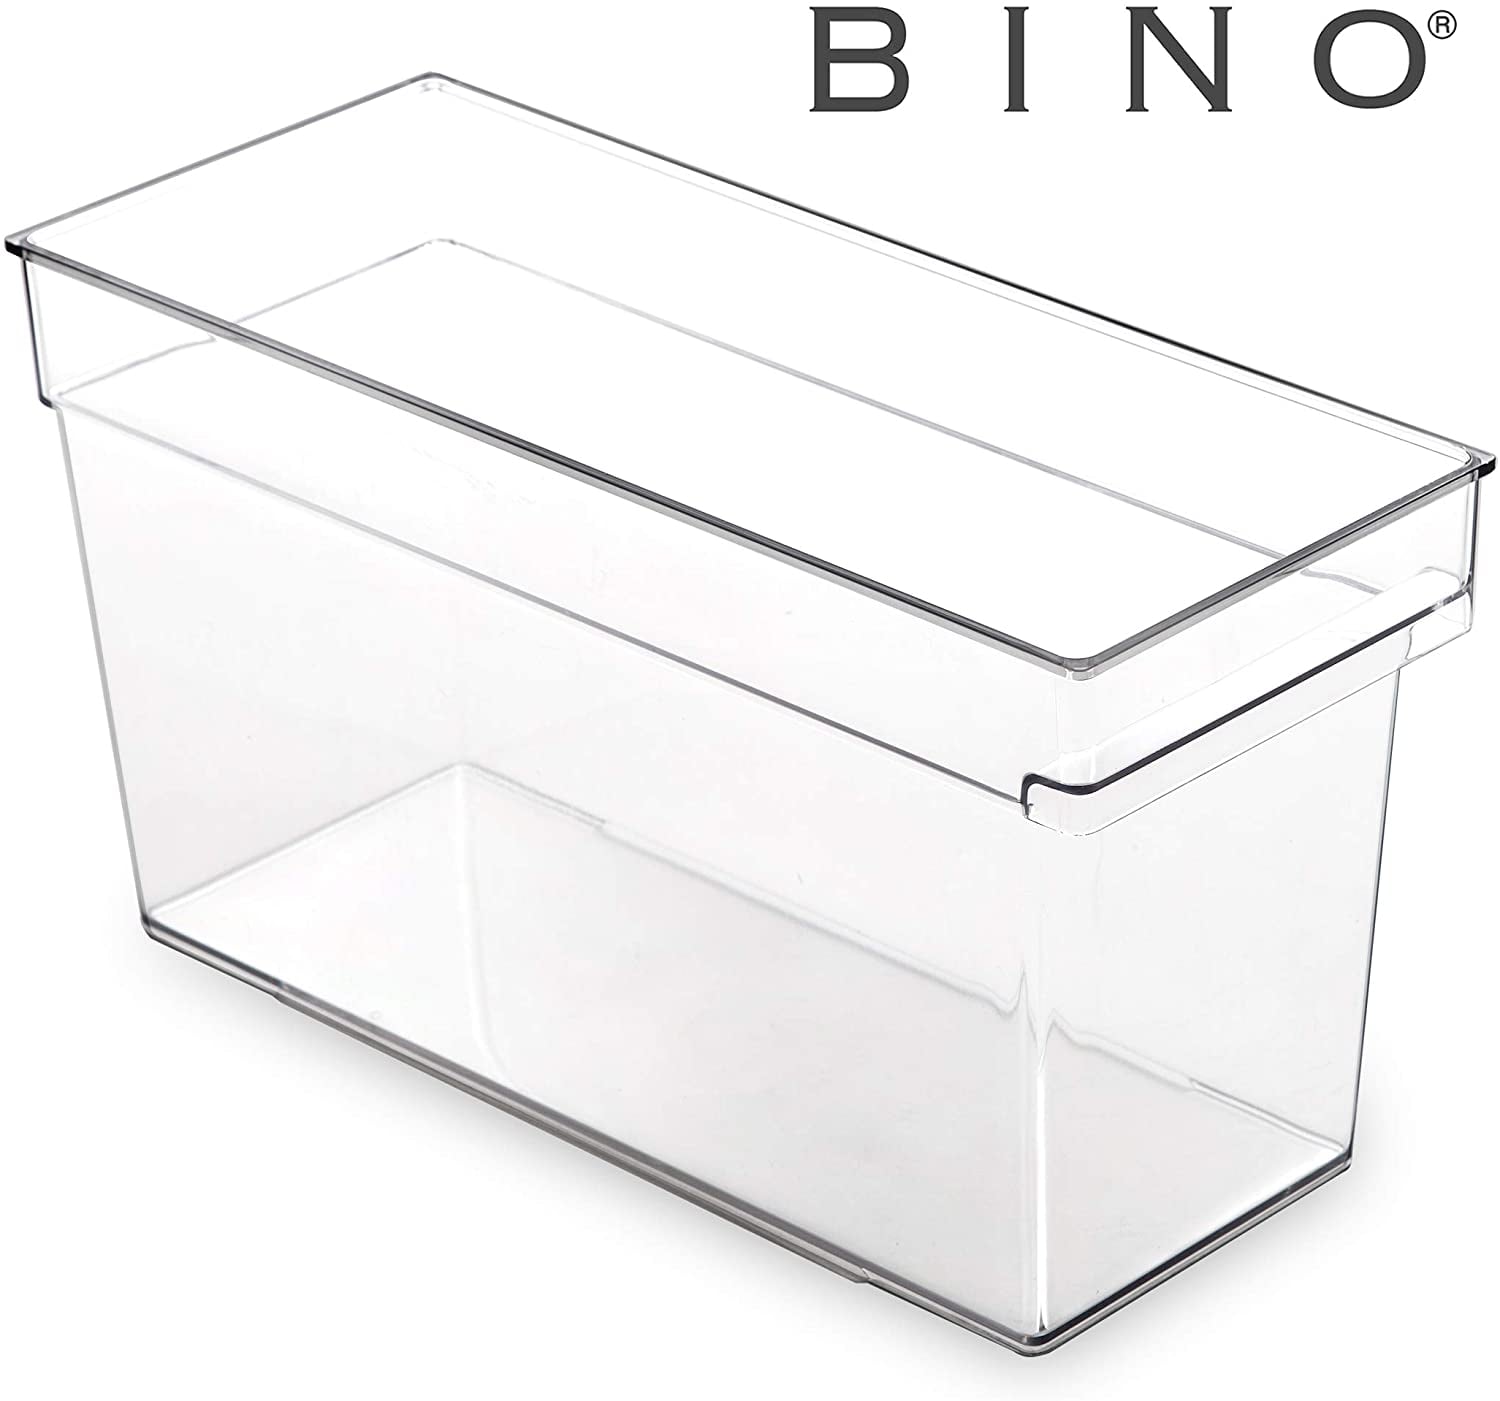 BINO Clear Plastic Storage Bin With Built-In Pull Out Handle